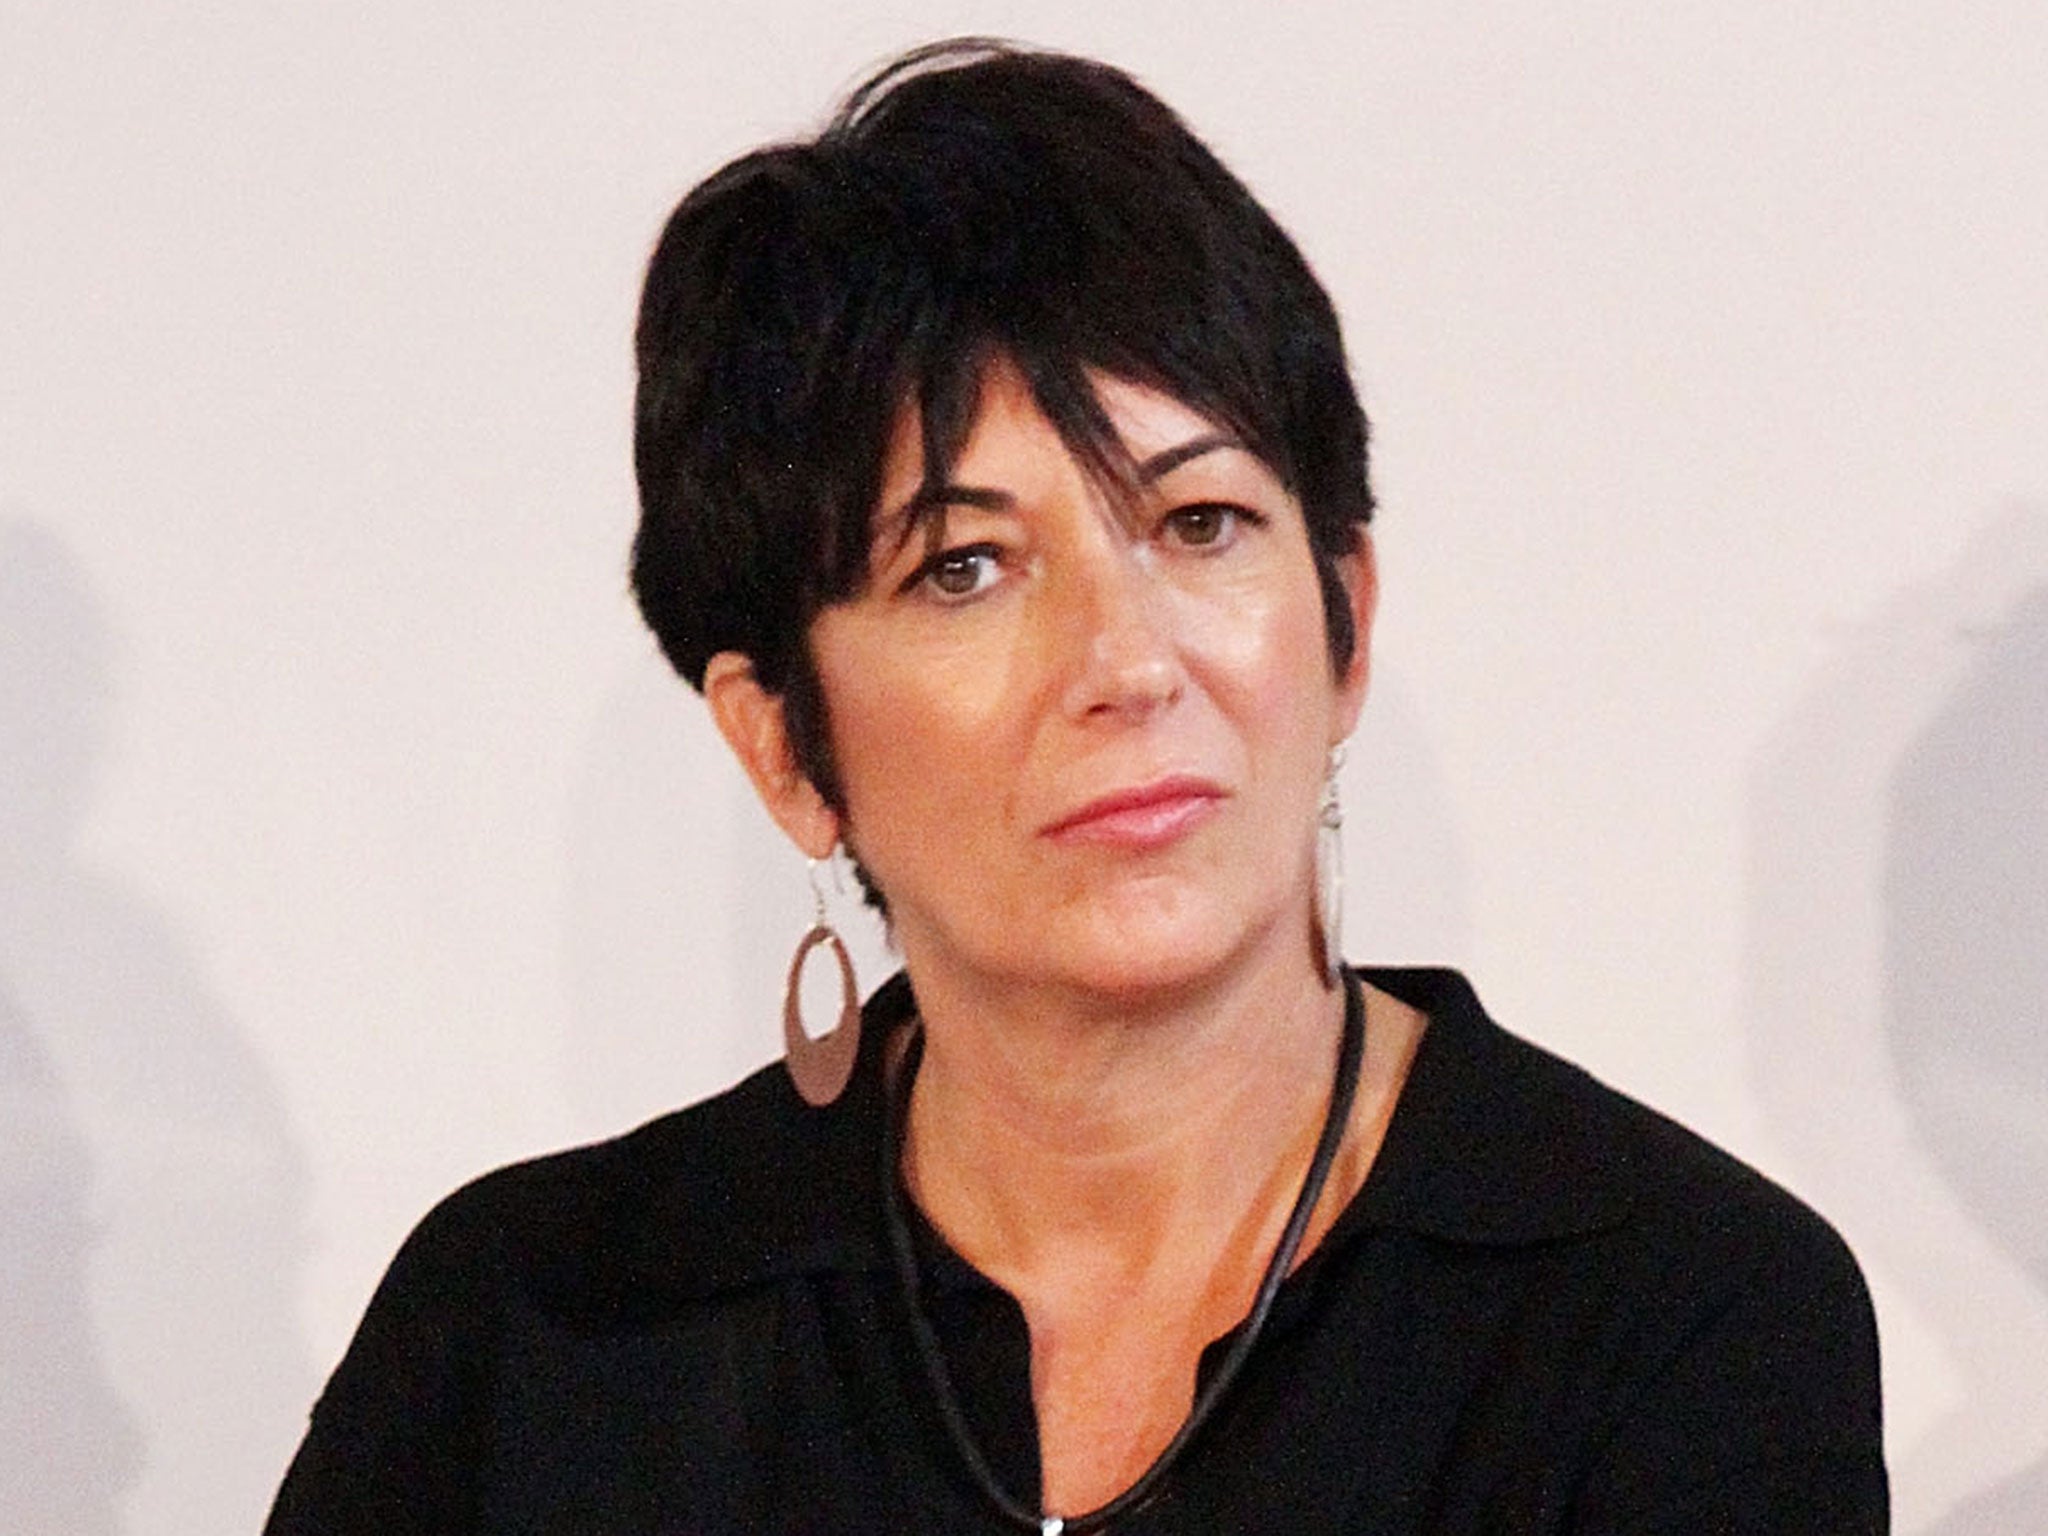 Ghislaine Maxwell was found guilty of five sex-trafficking charges in December